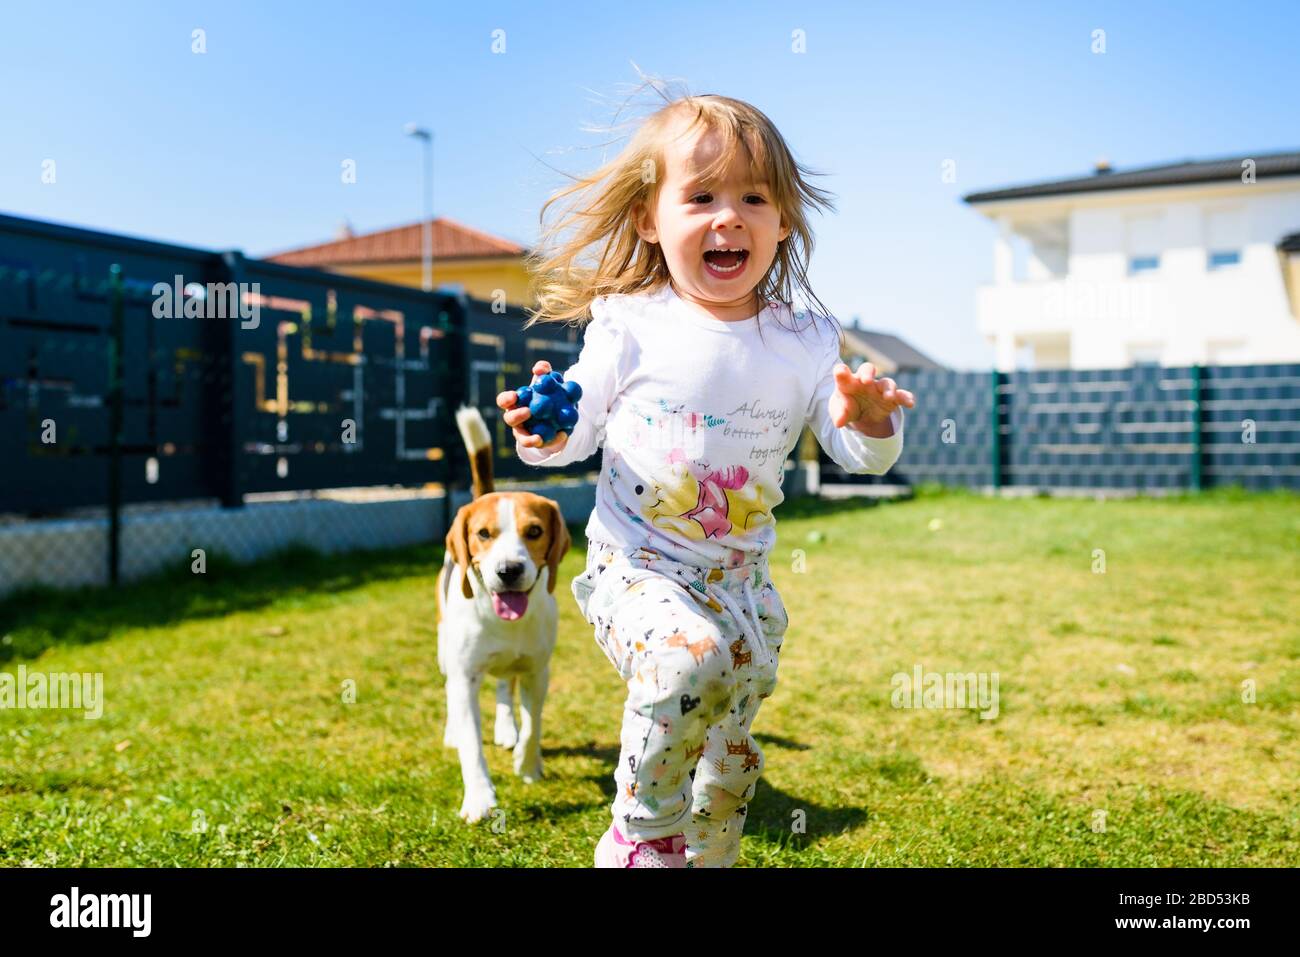 Child playing with beagle dog best friend in backyard on sunny spring day. Stock Photo